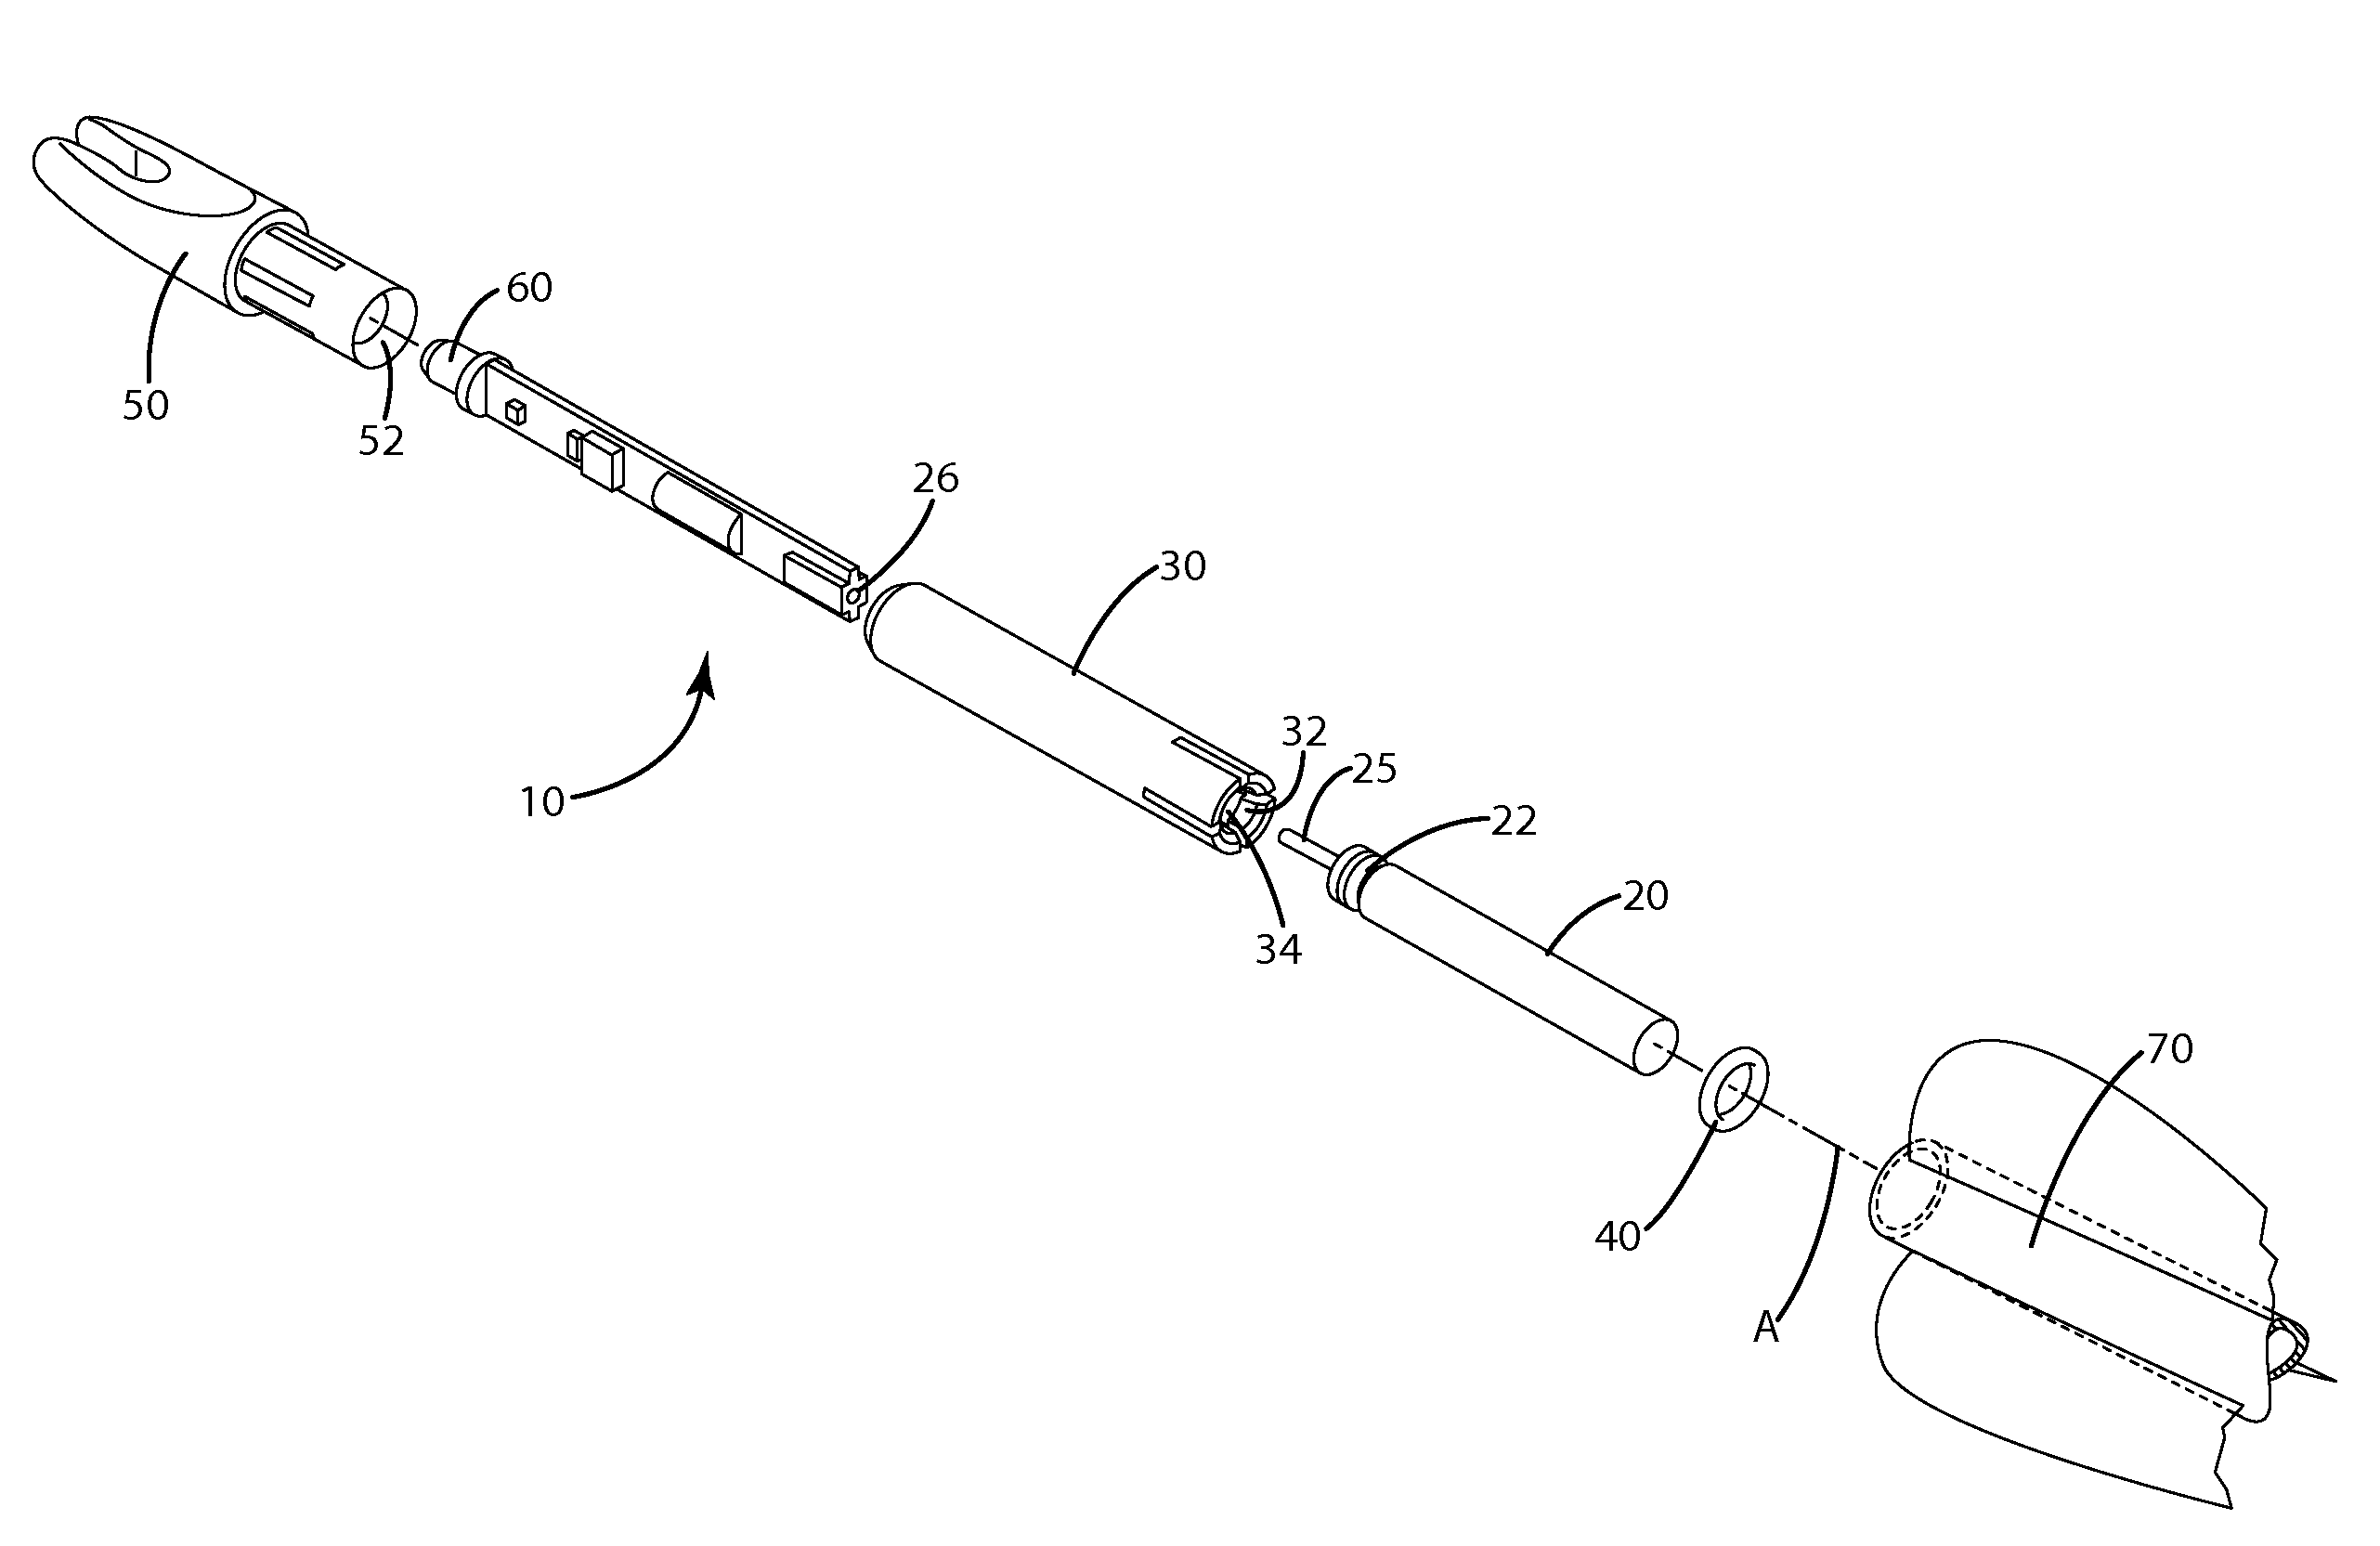 Lighted archery nock with variable light emissions